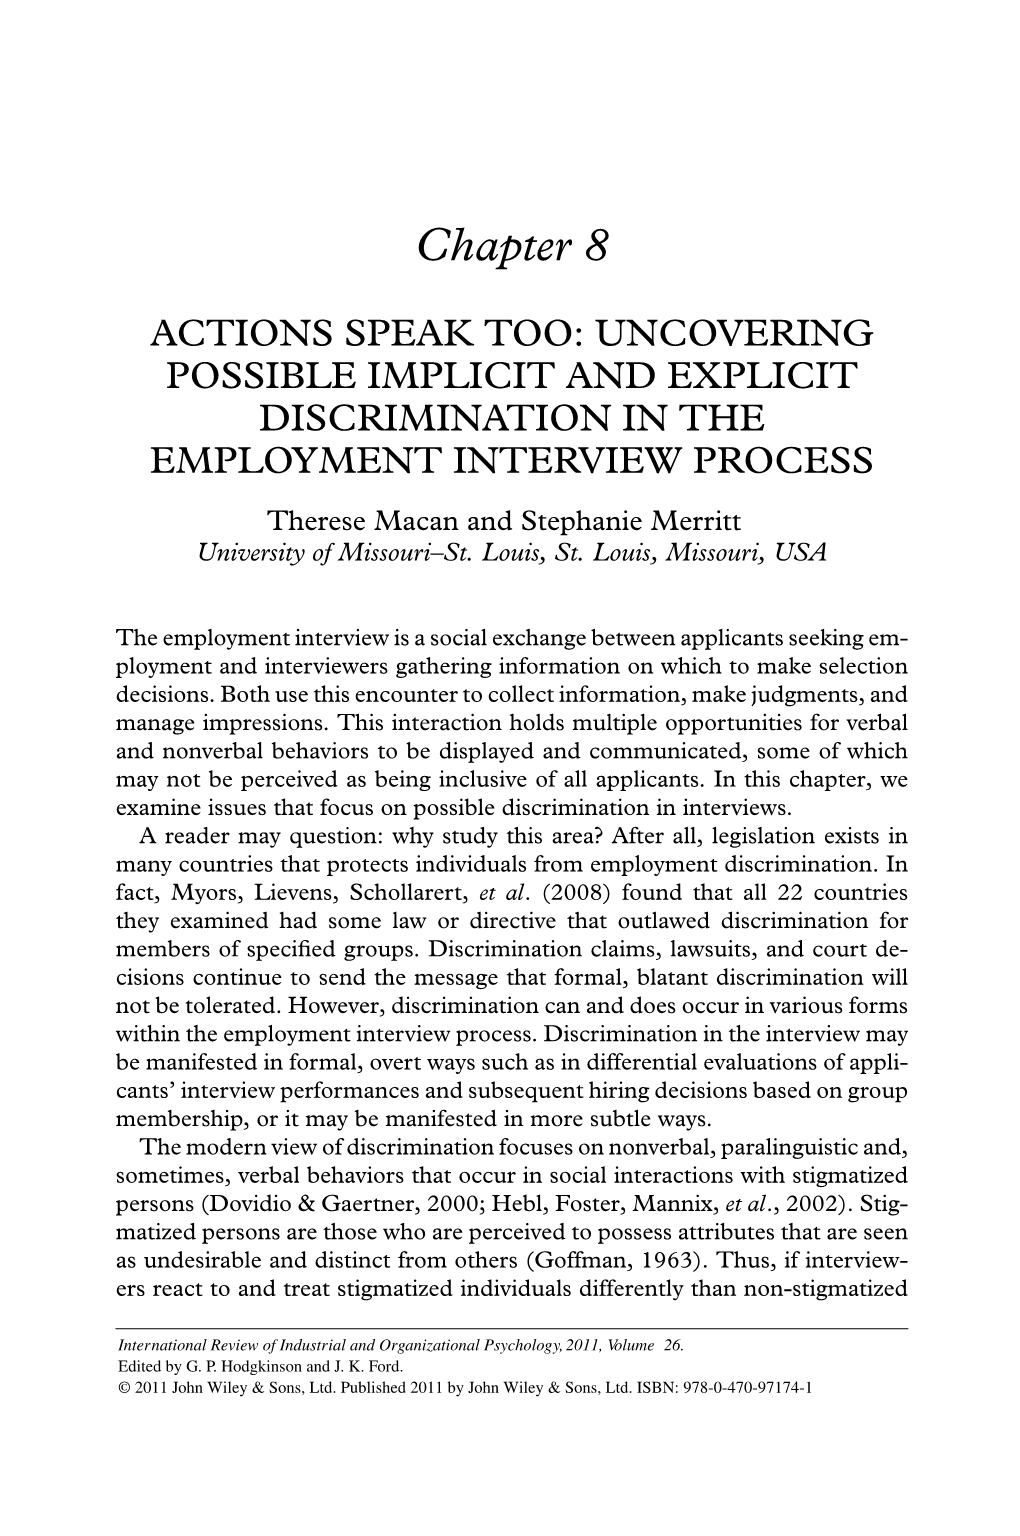 Actions Speak Too: Uncovering Possible Implicit and Explicit Discrimination in the Employment Interview Process